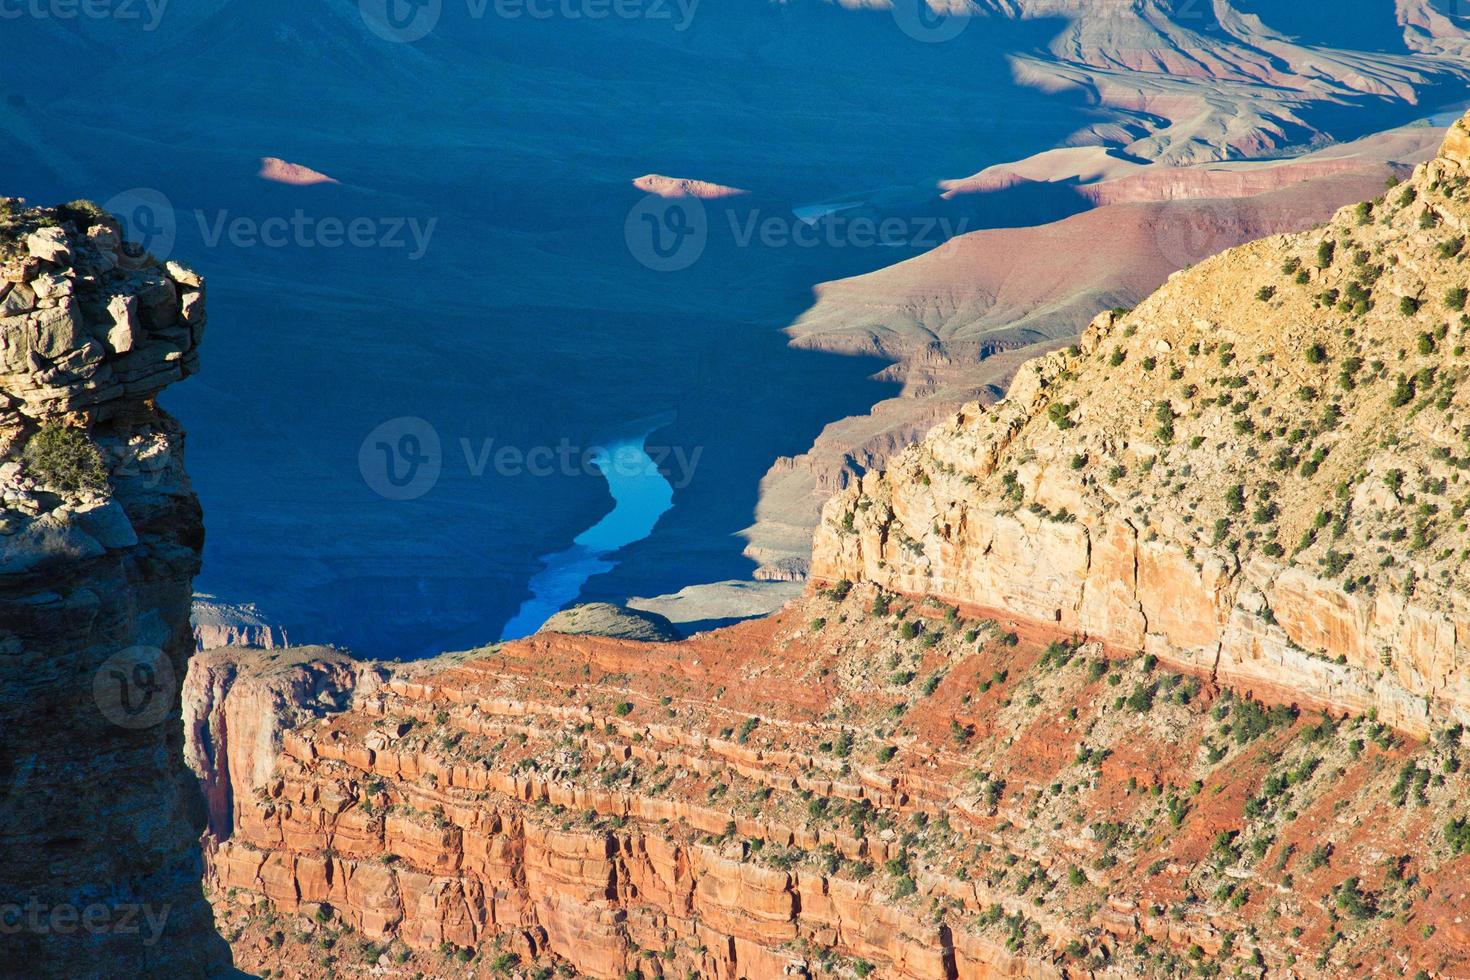 Grand Canyon scenic views and landscapes photo